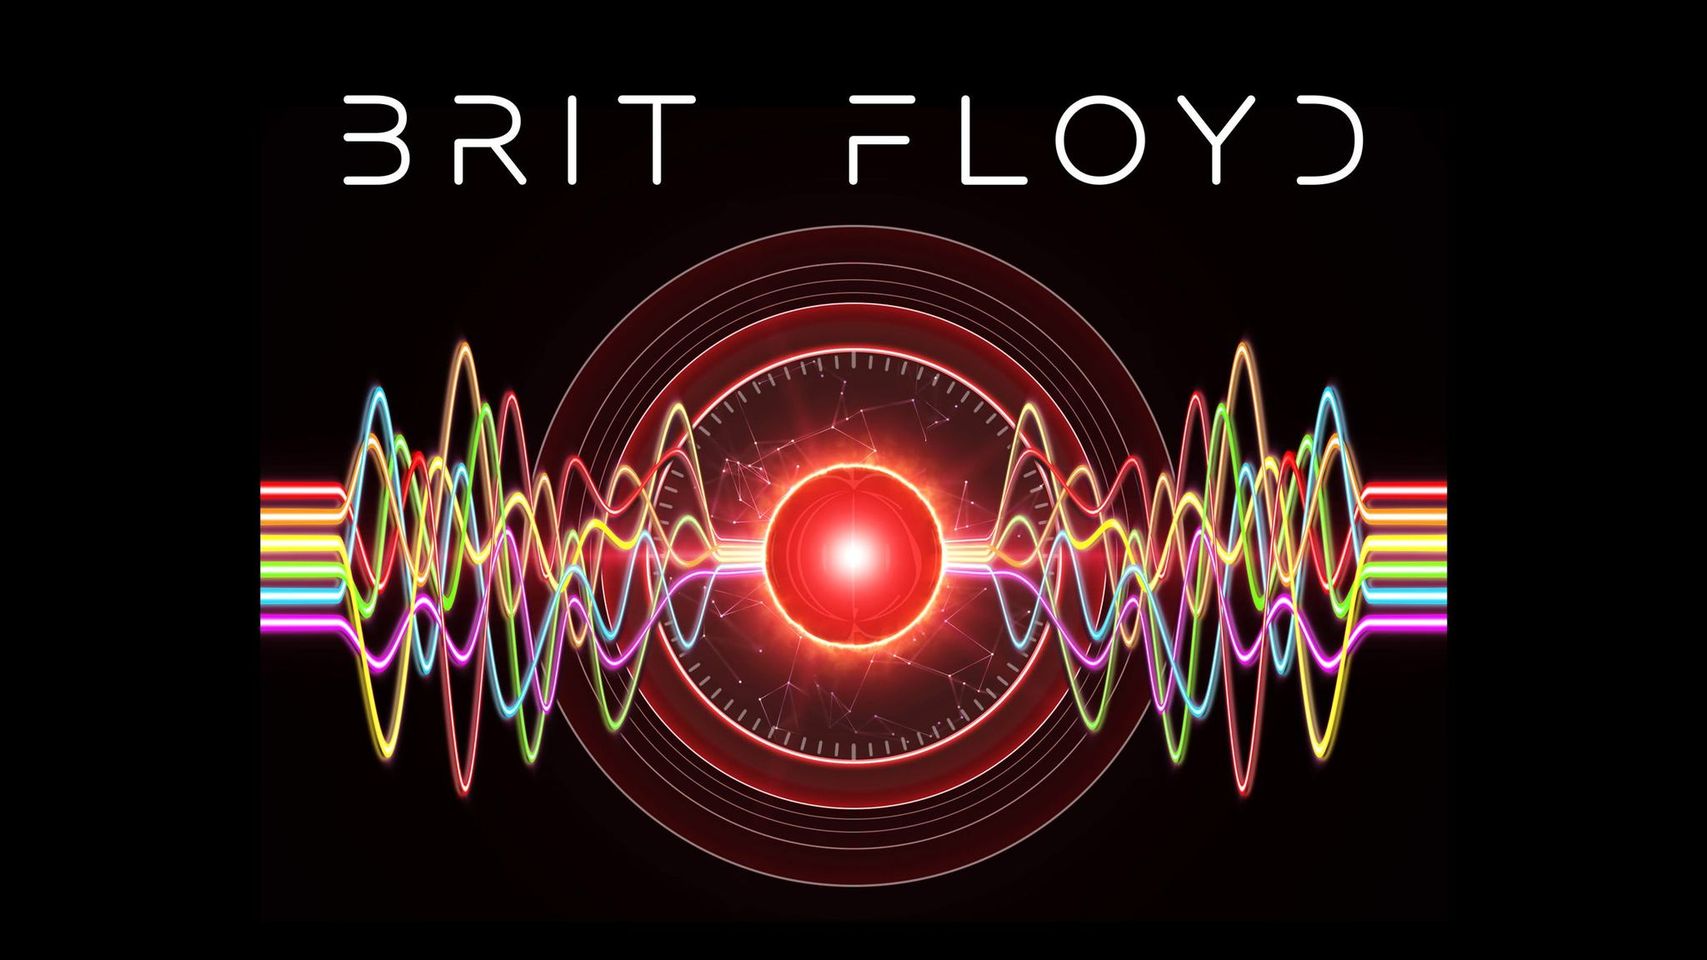 More Info for BRIT FLOYD